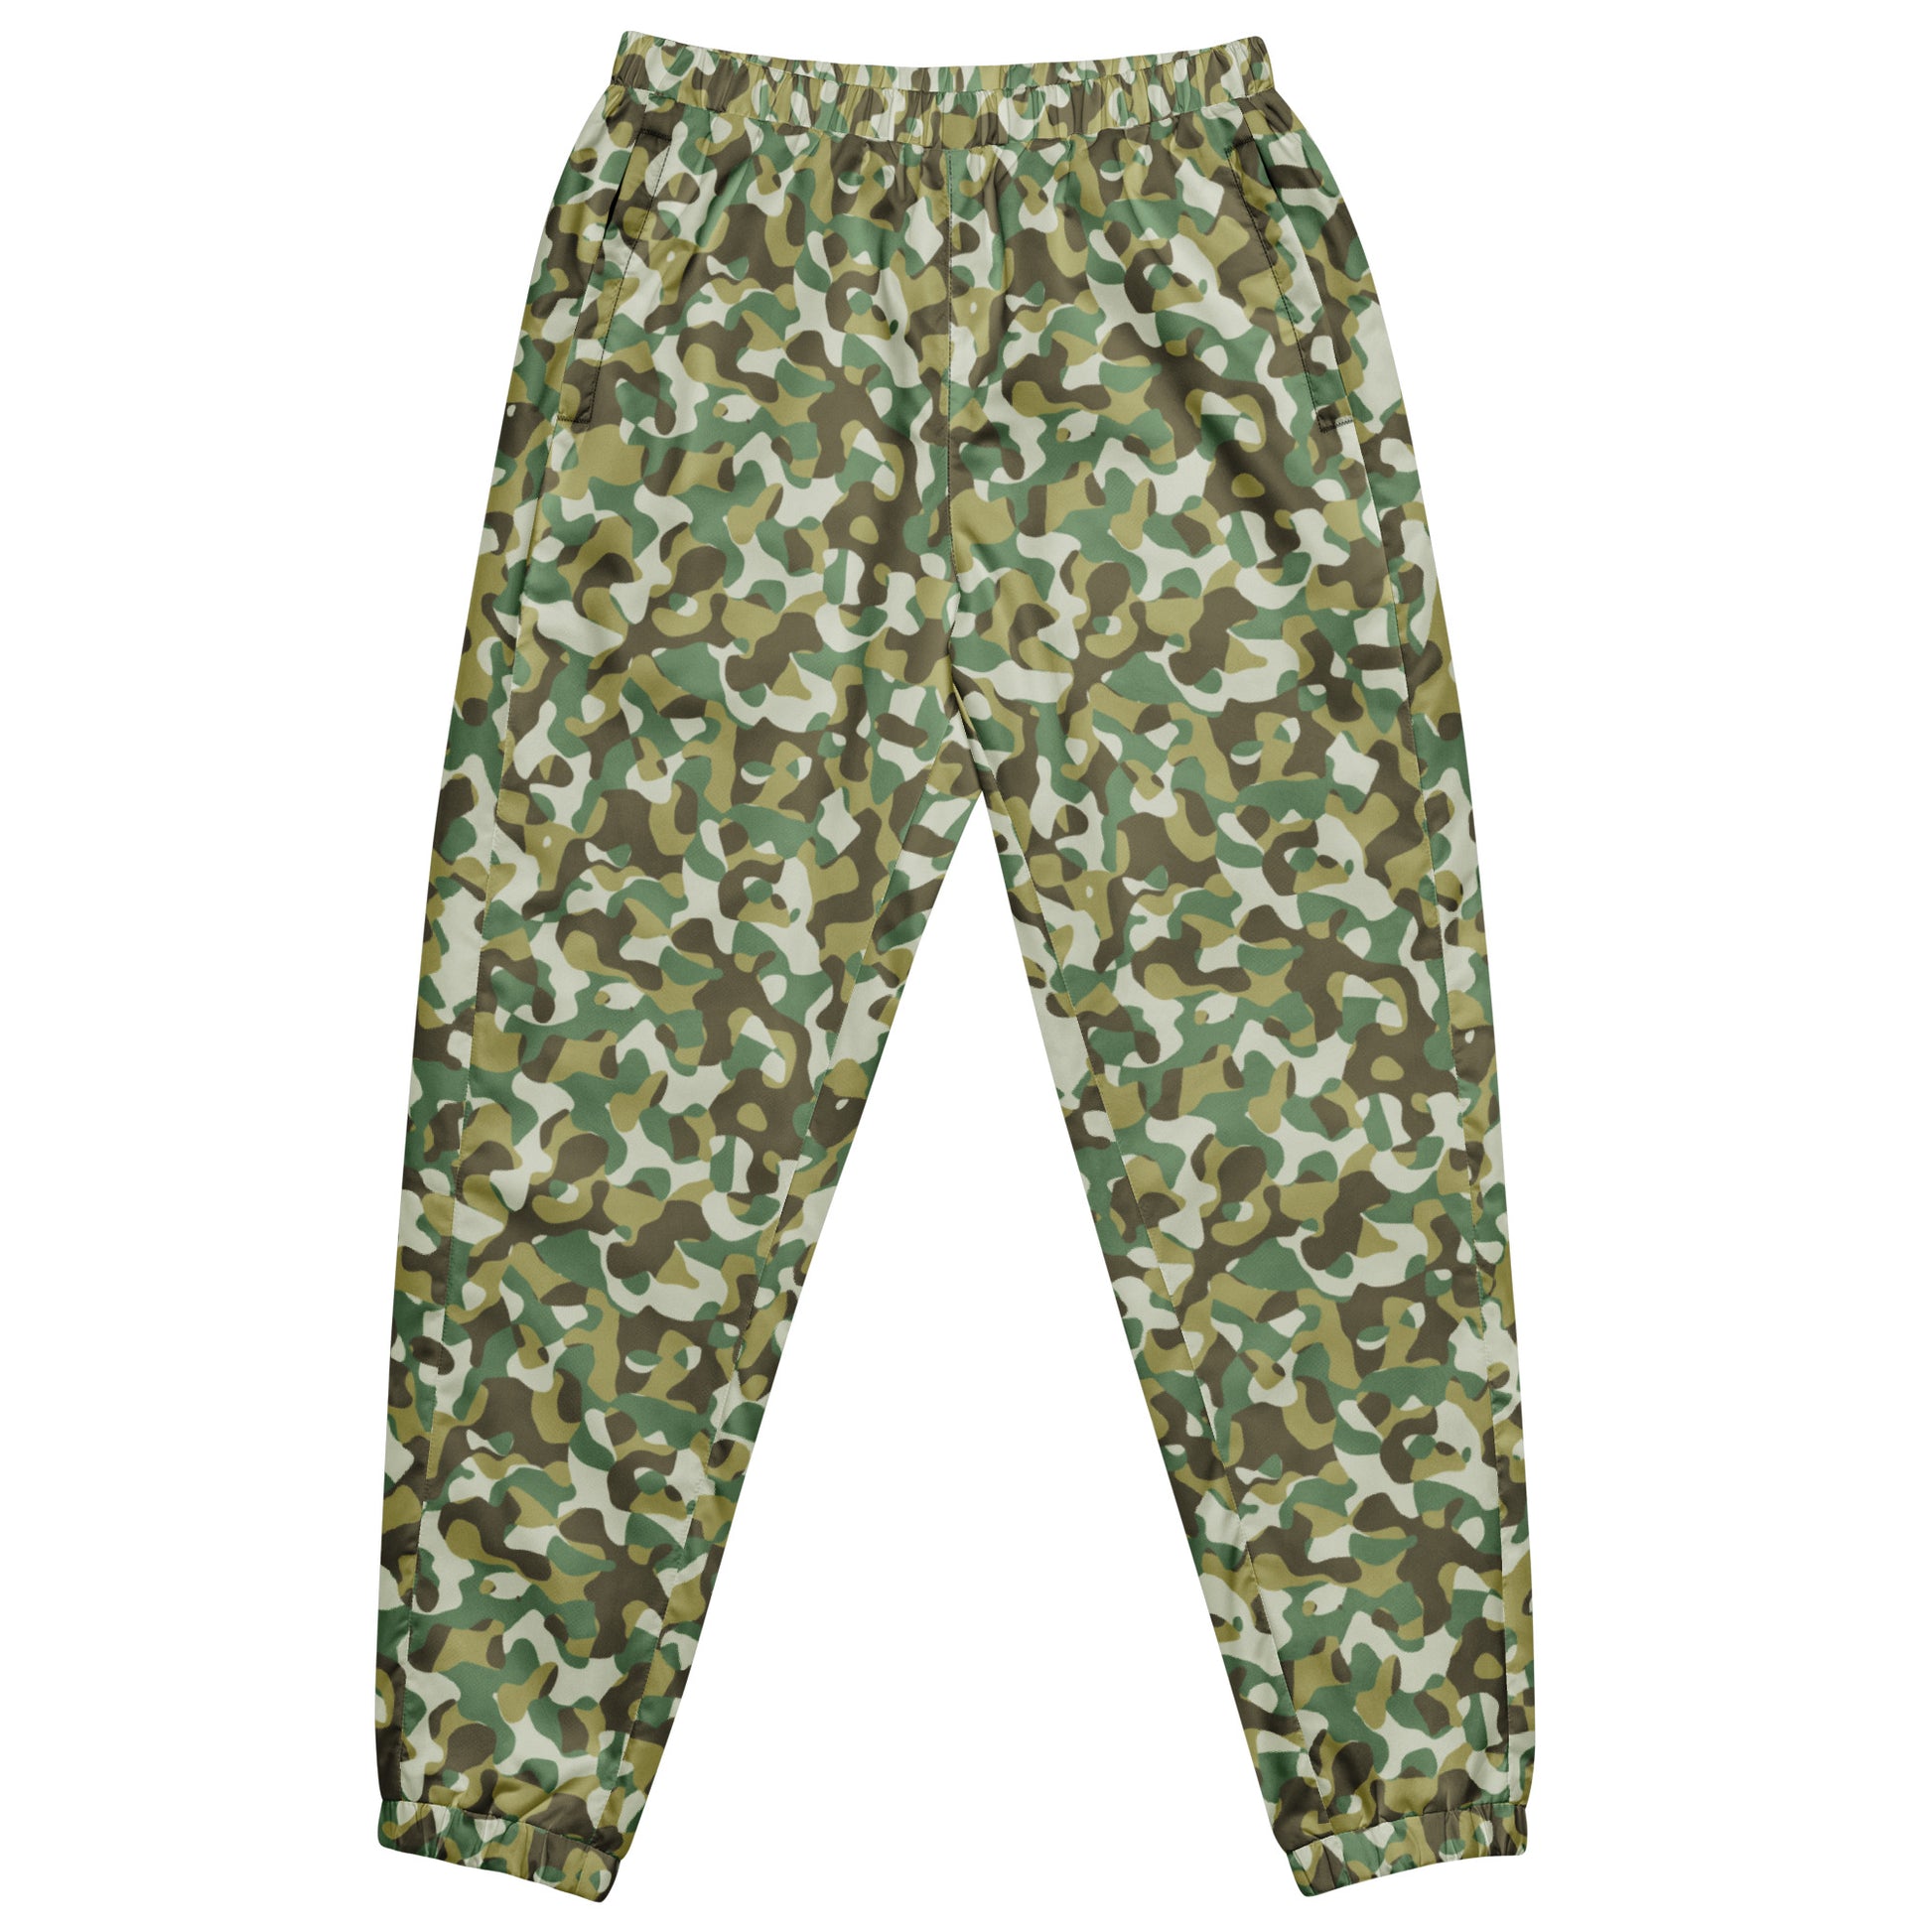 Camouflage Print track pants - Sport Finesse